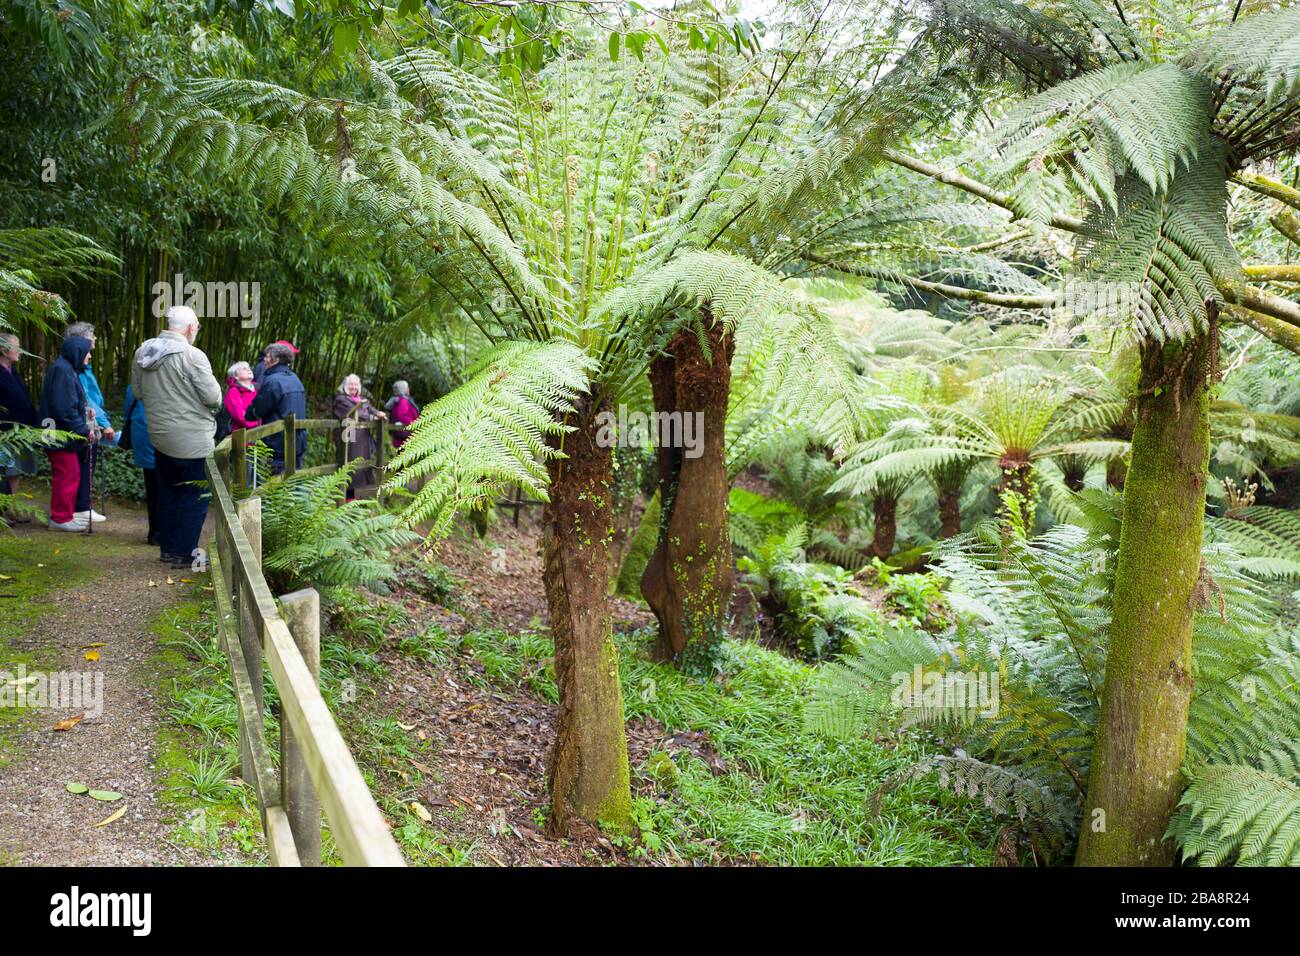 Tree ferns are a special feature of this valley garden and attract groups of visitors to Trewidden near Penzance Cornwall England UK Stock Photo